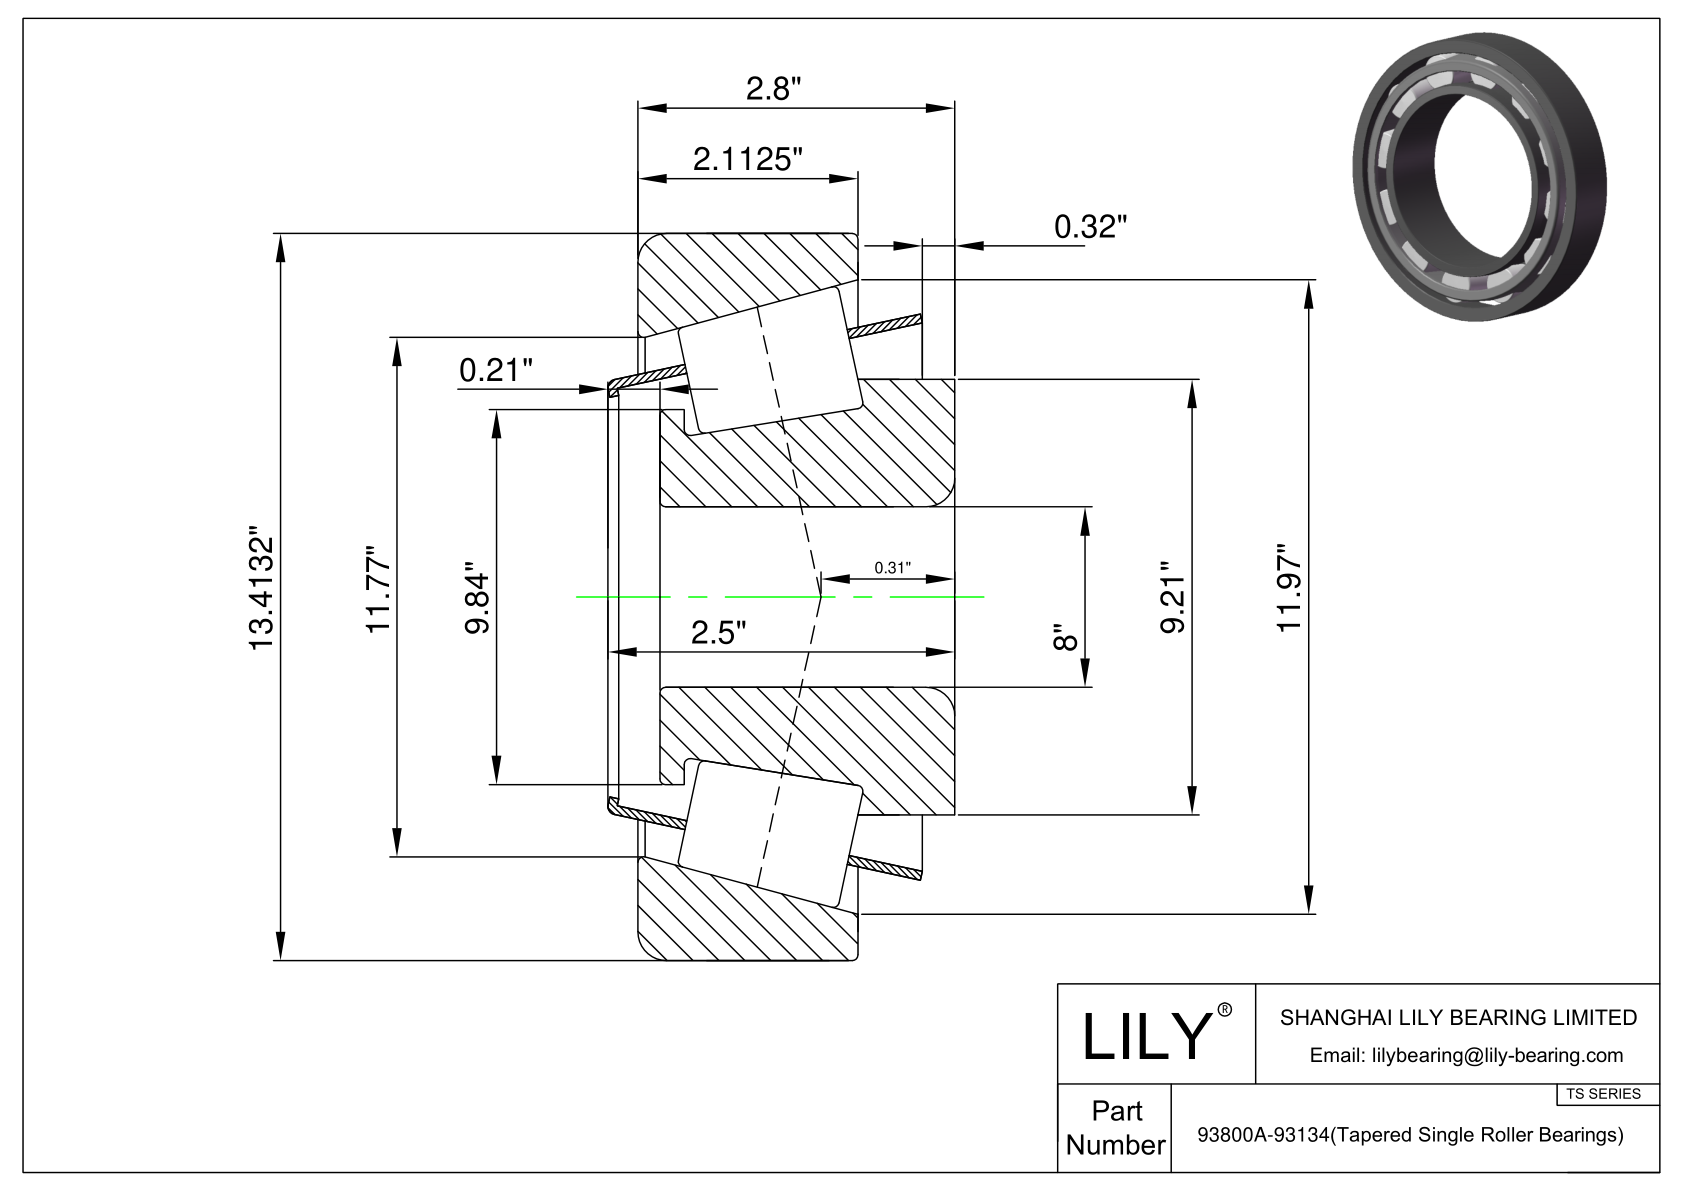 93800A-93134 TS (Tapered Single Roller Bearings) (Imperial) cad drawing